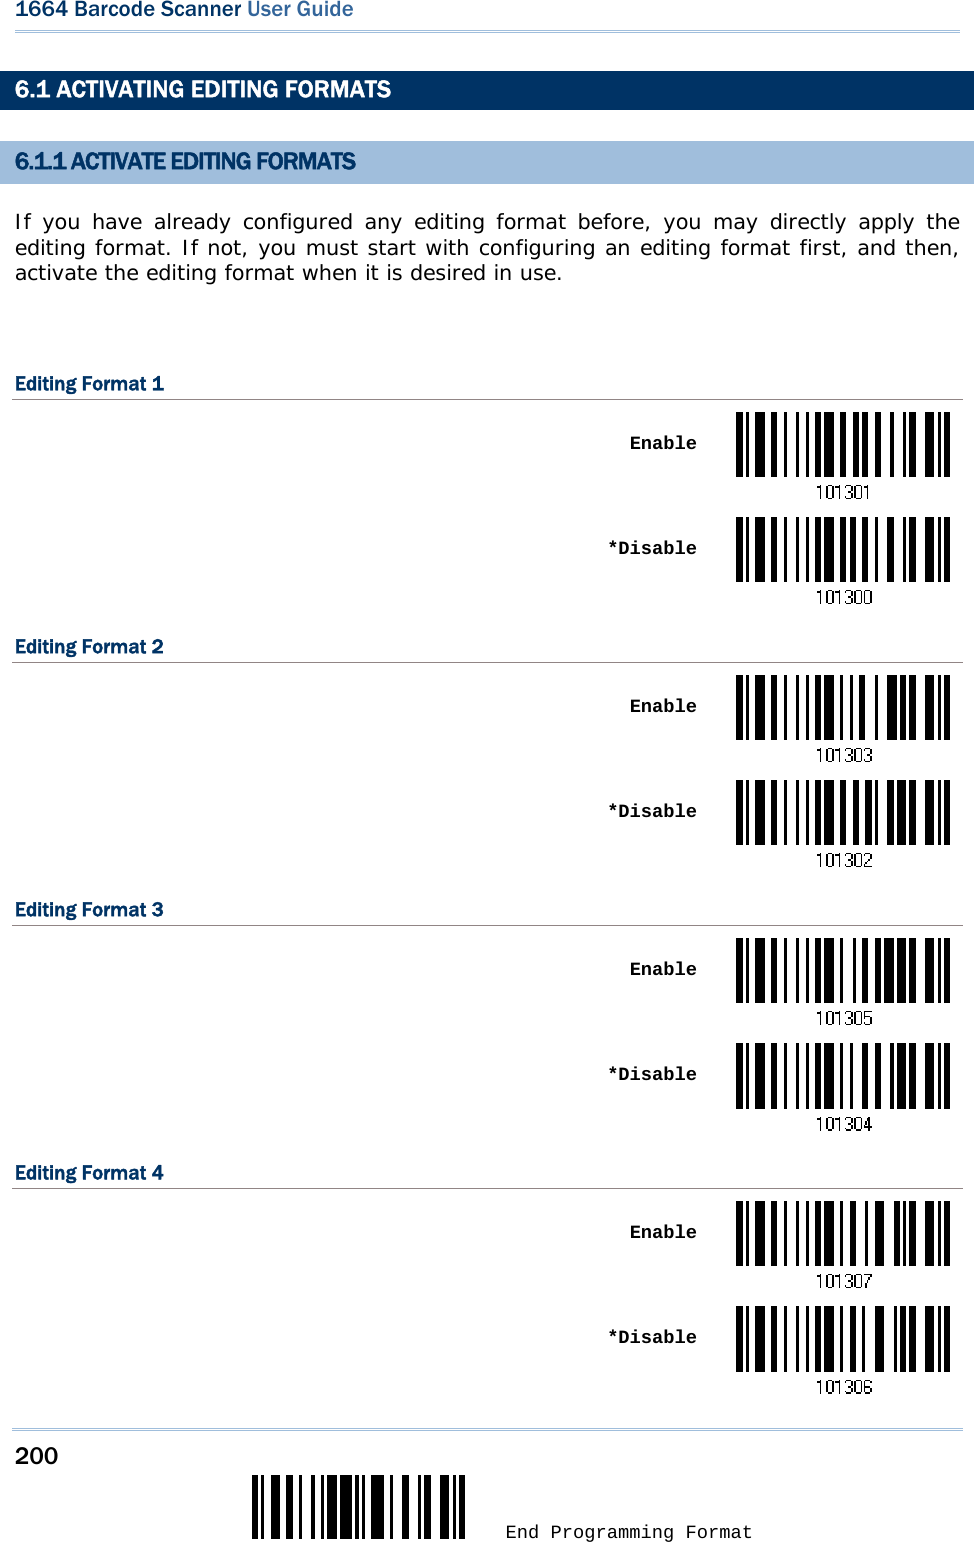 200  End Programming Format 1664 Barcode Scanner User Guide  6.1 ACTIVATING EDITING FORMATS 6.1.1 ACTIVATE EDITING FORMATS If you have already configured any editing format before, you may directly apply the editing format. If not, you must start with configuring an editing format first, and then, activate the editing format when it is desired in use.  Editing Format 1  Enable *DisableEditing Format 2  Enable *DisableEditing Format 3  Enable *DisableEditing Format 4  Enable *Disable